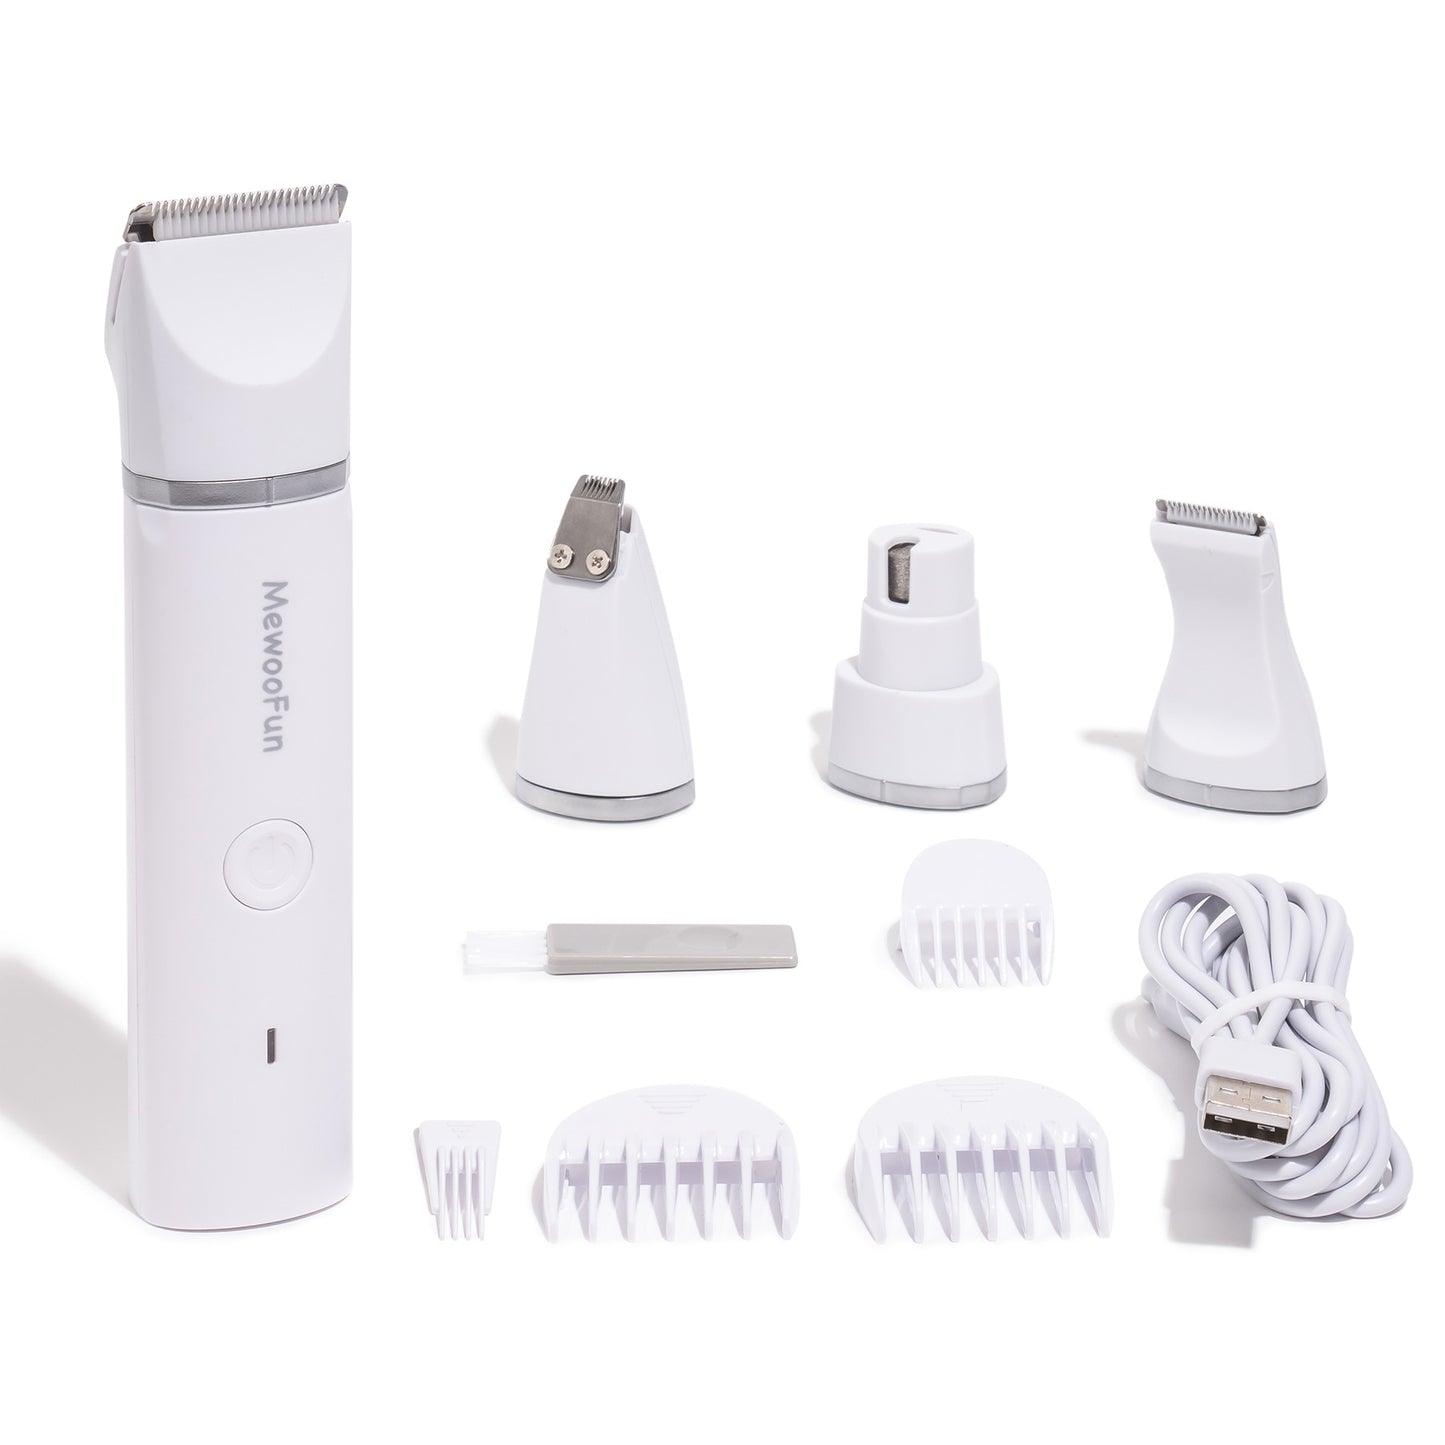 Mewoofun 4 in 1 Pet Electric Hair Trimmer